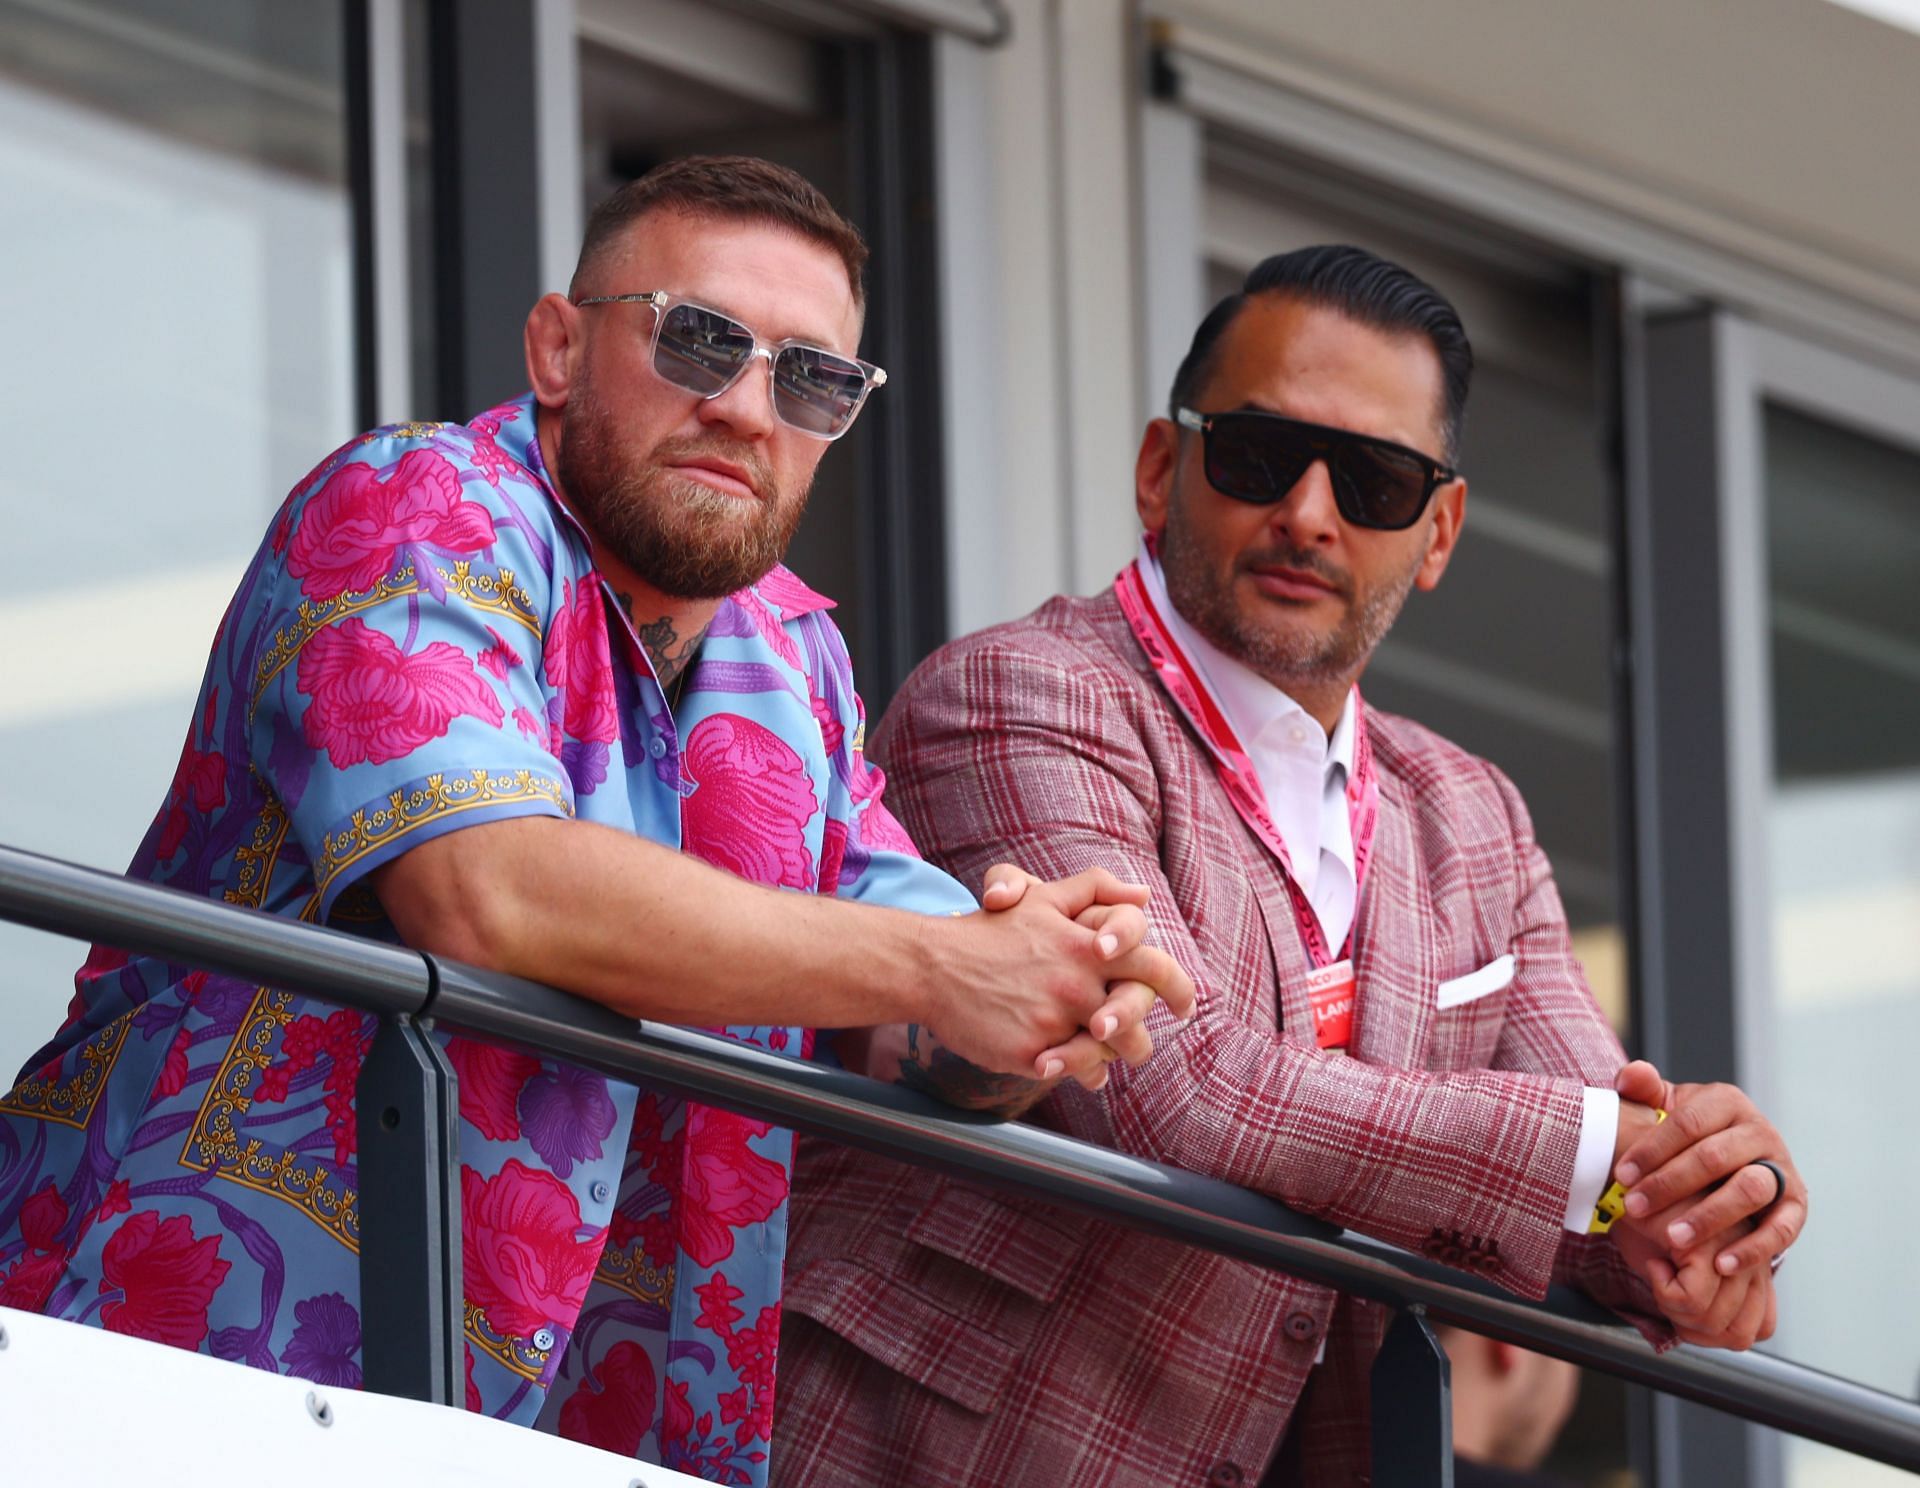 Conor McGregor with manager Audie Attar at F1 Grand Prix of Monaco - Qualifying